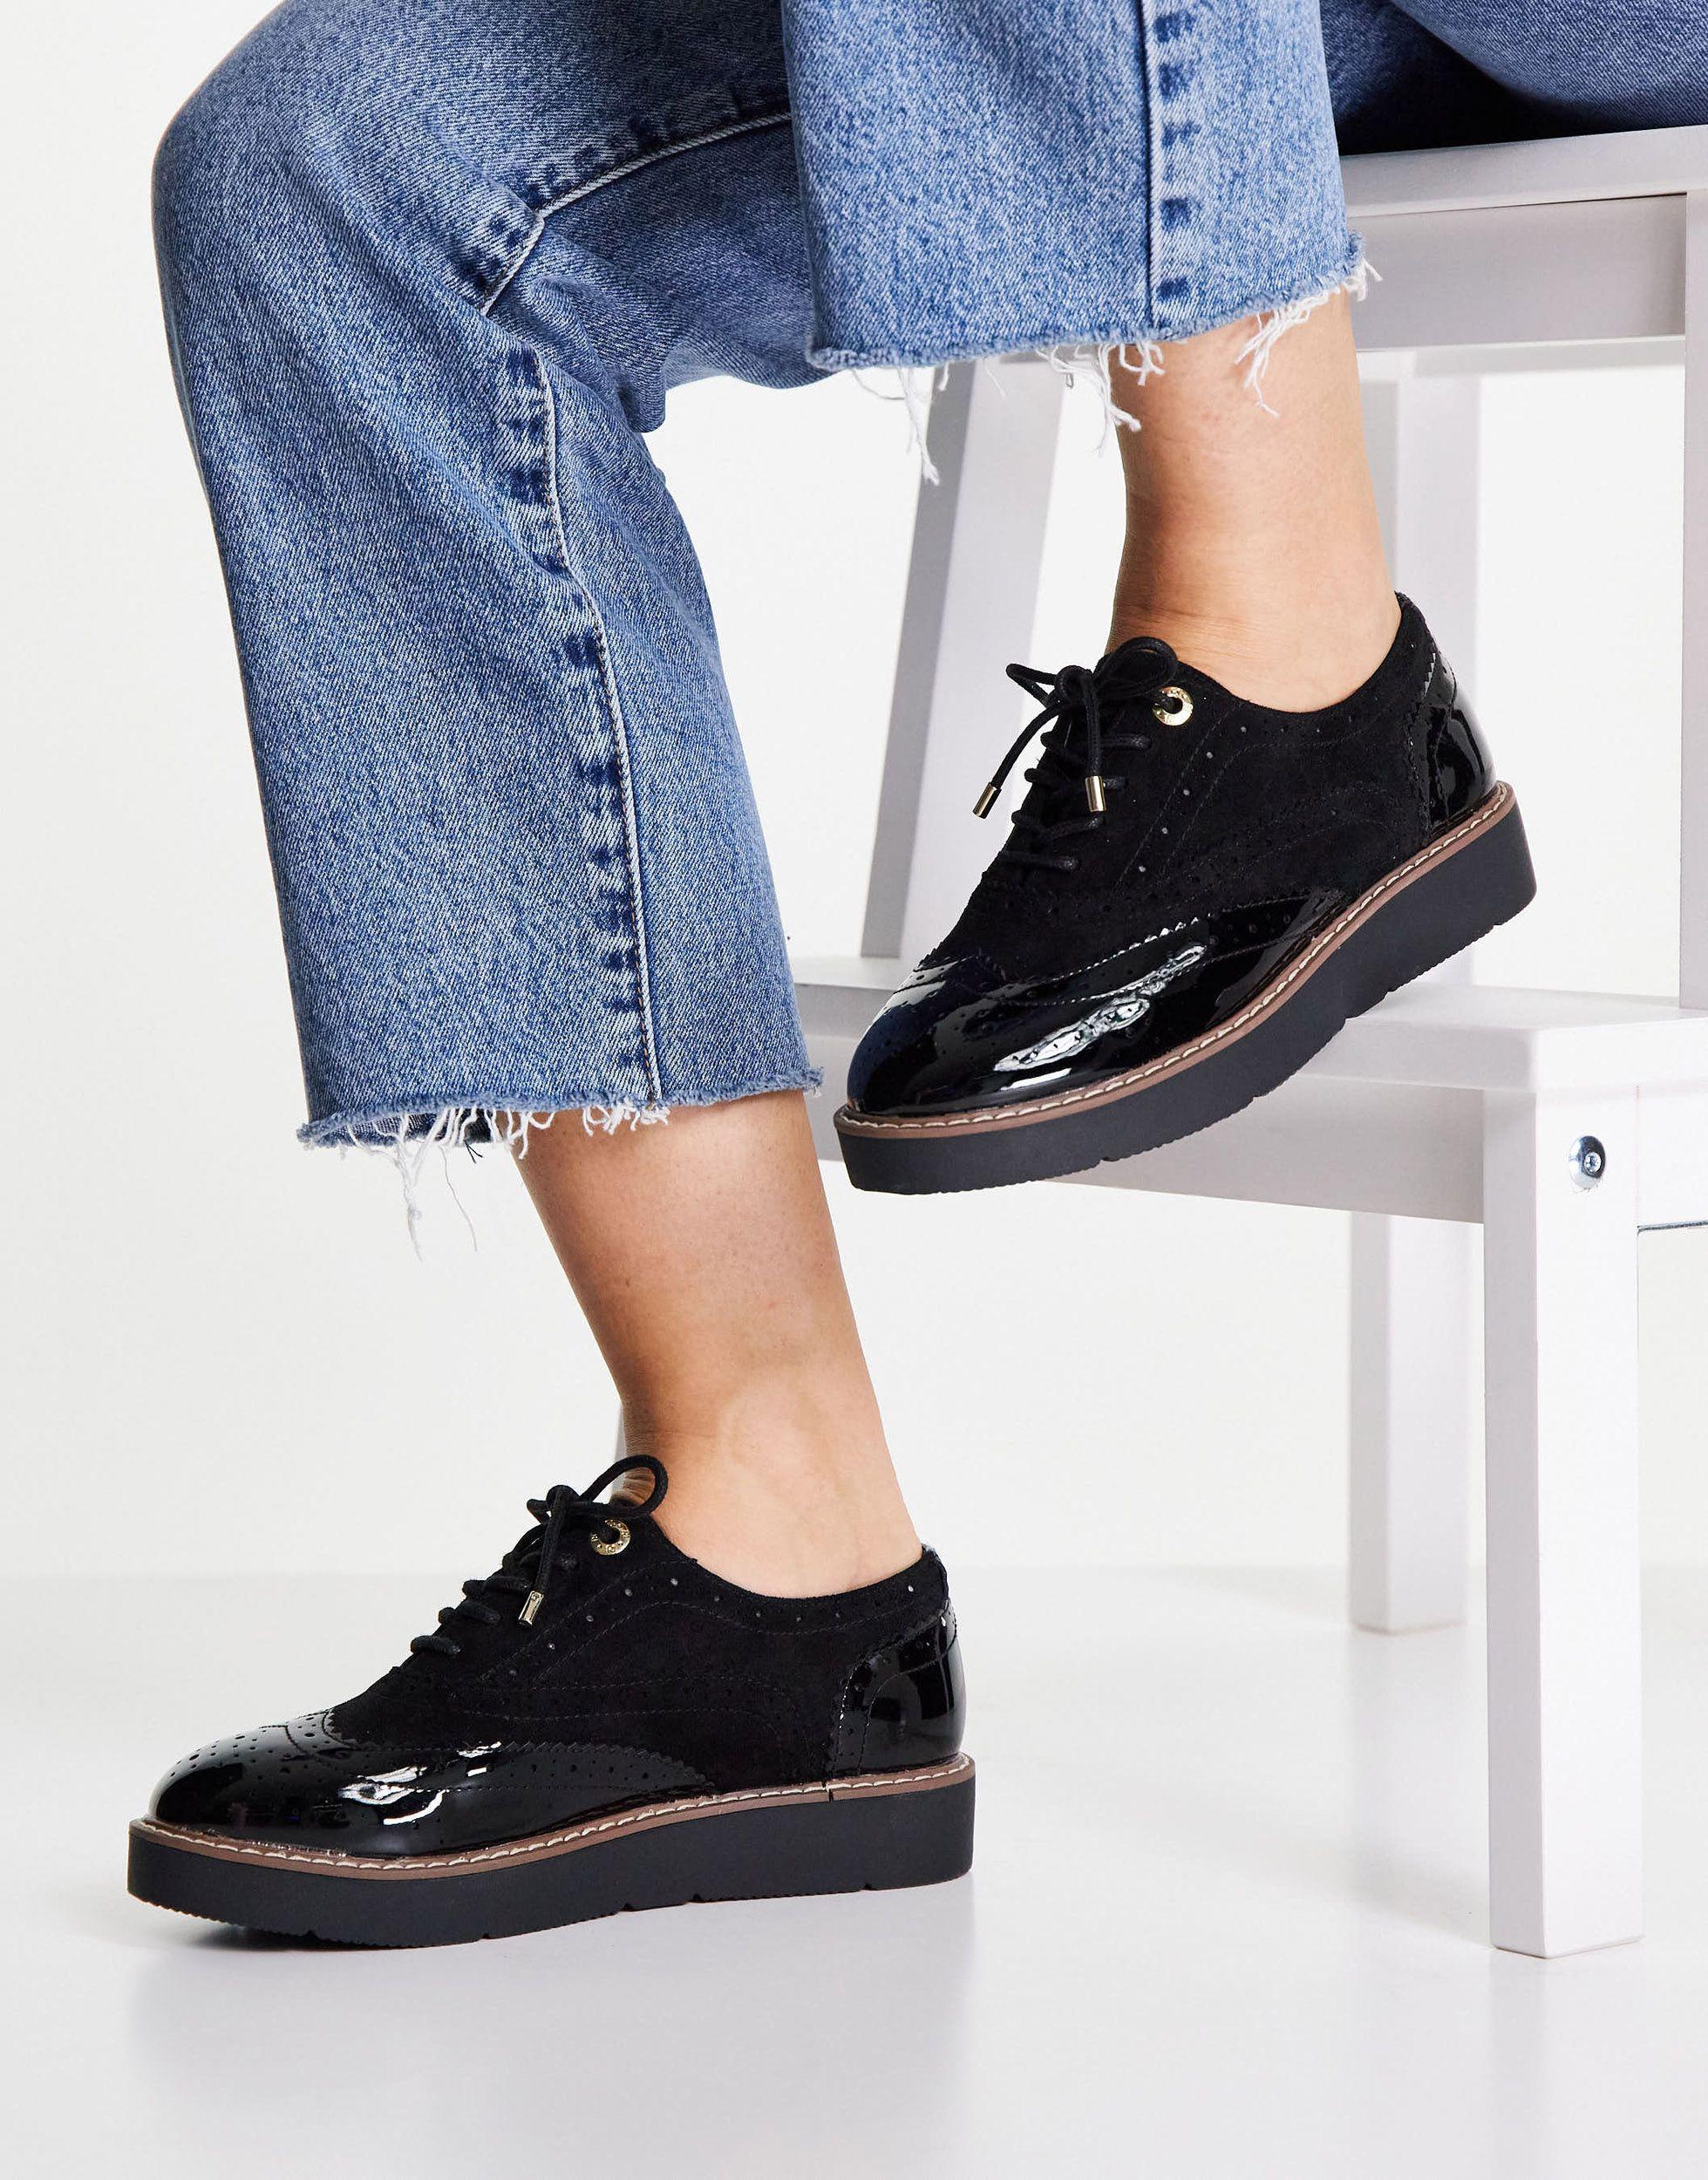 River Island Contrast Patent Brogue Shoe in Black | Lyst